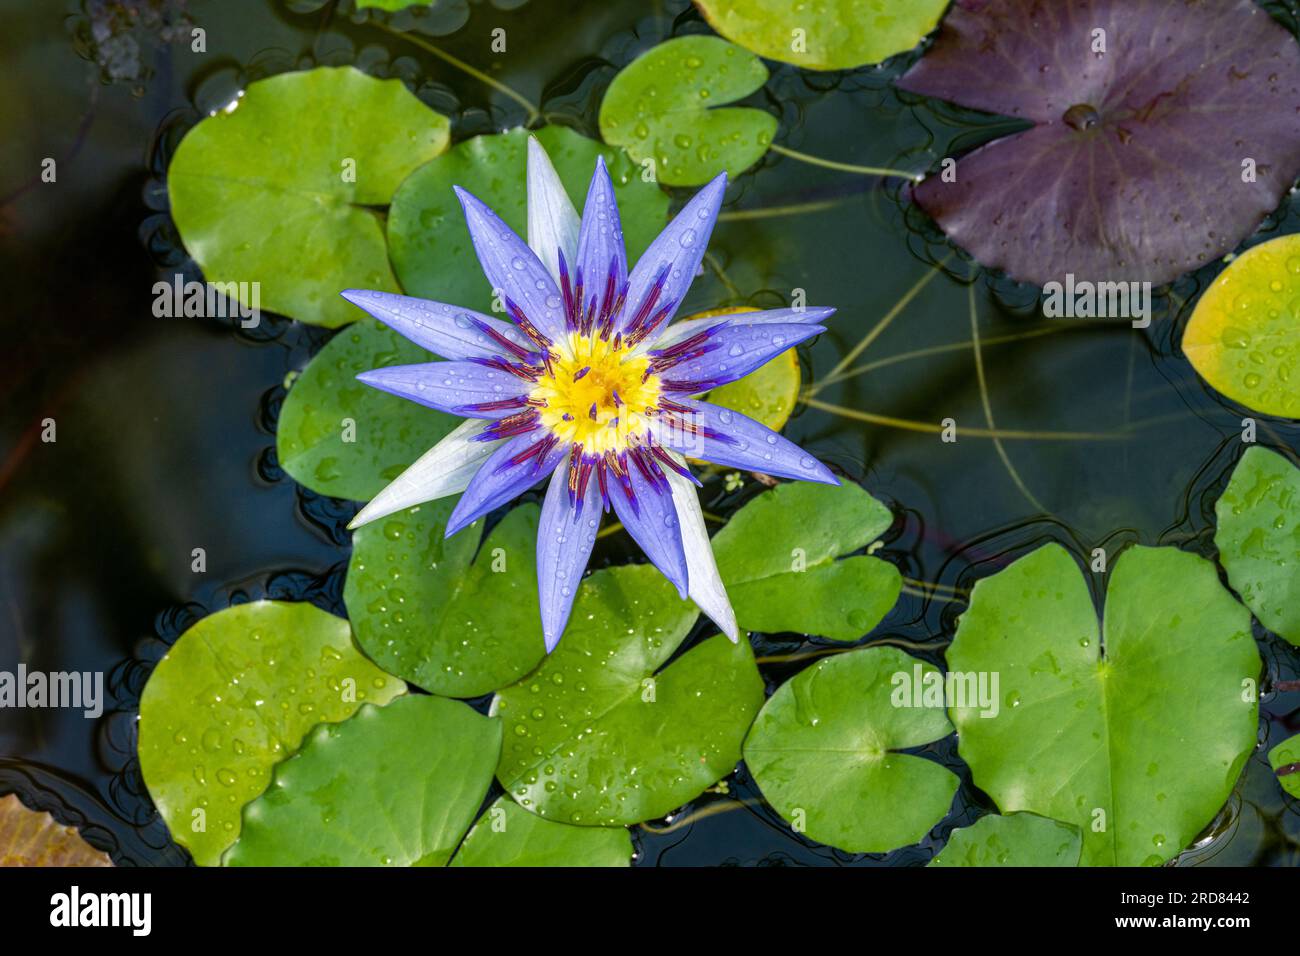 Nymphaea caerulea savigny (Blue Lotos of Egypt) water lily plant in bloom, beautiful flowering lotus flowers in garden pond Stock Photo